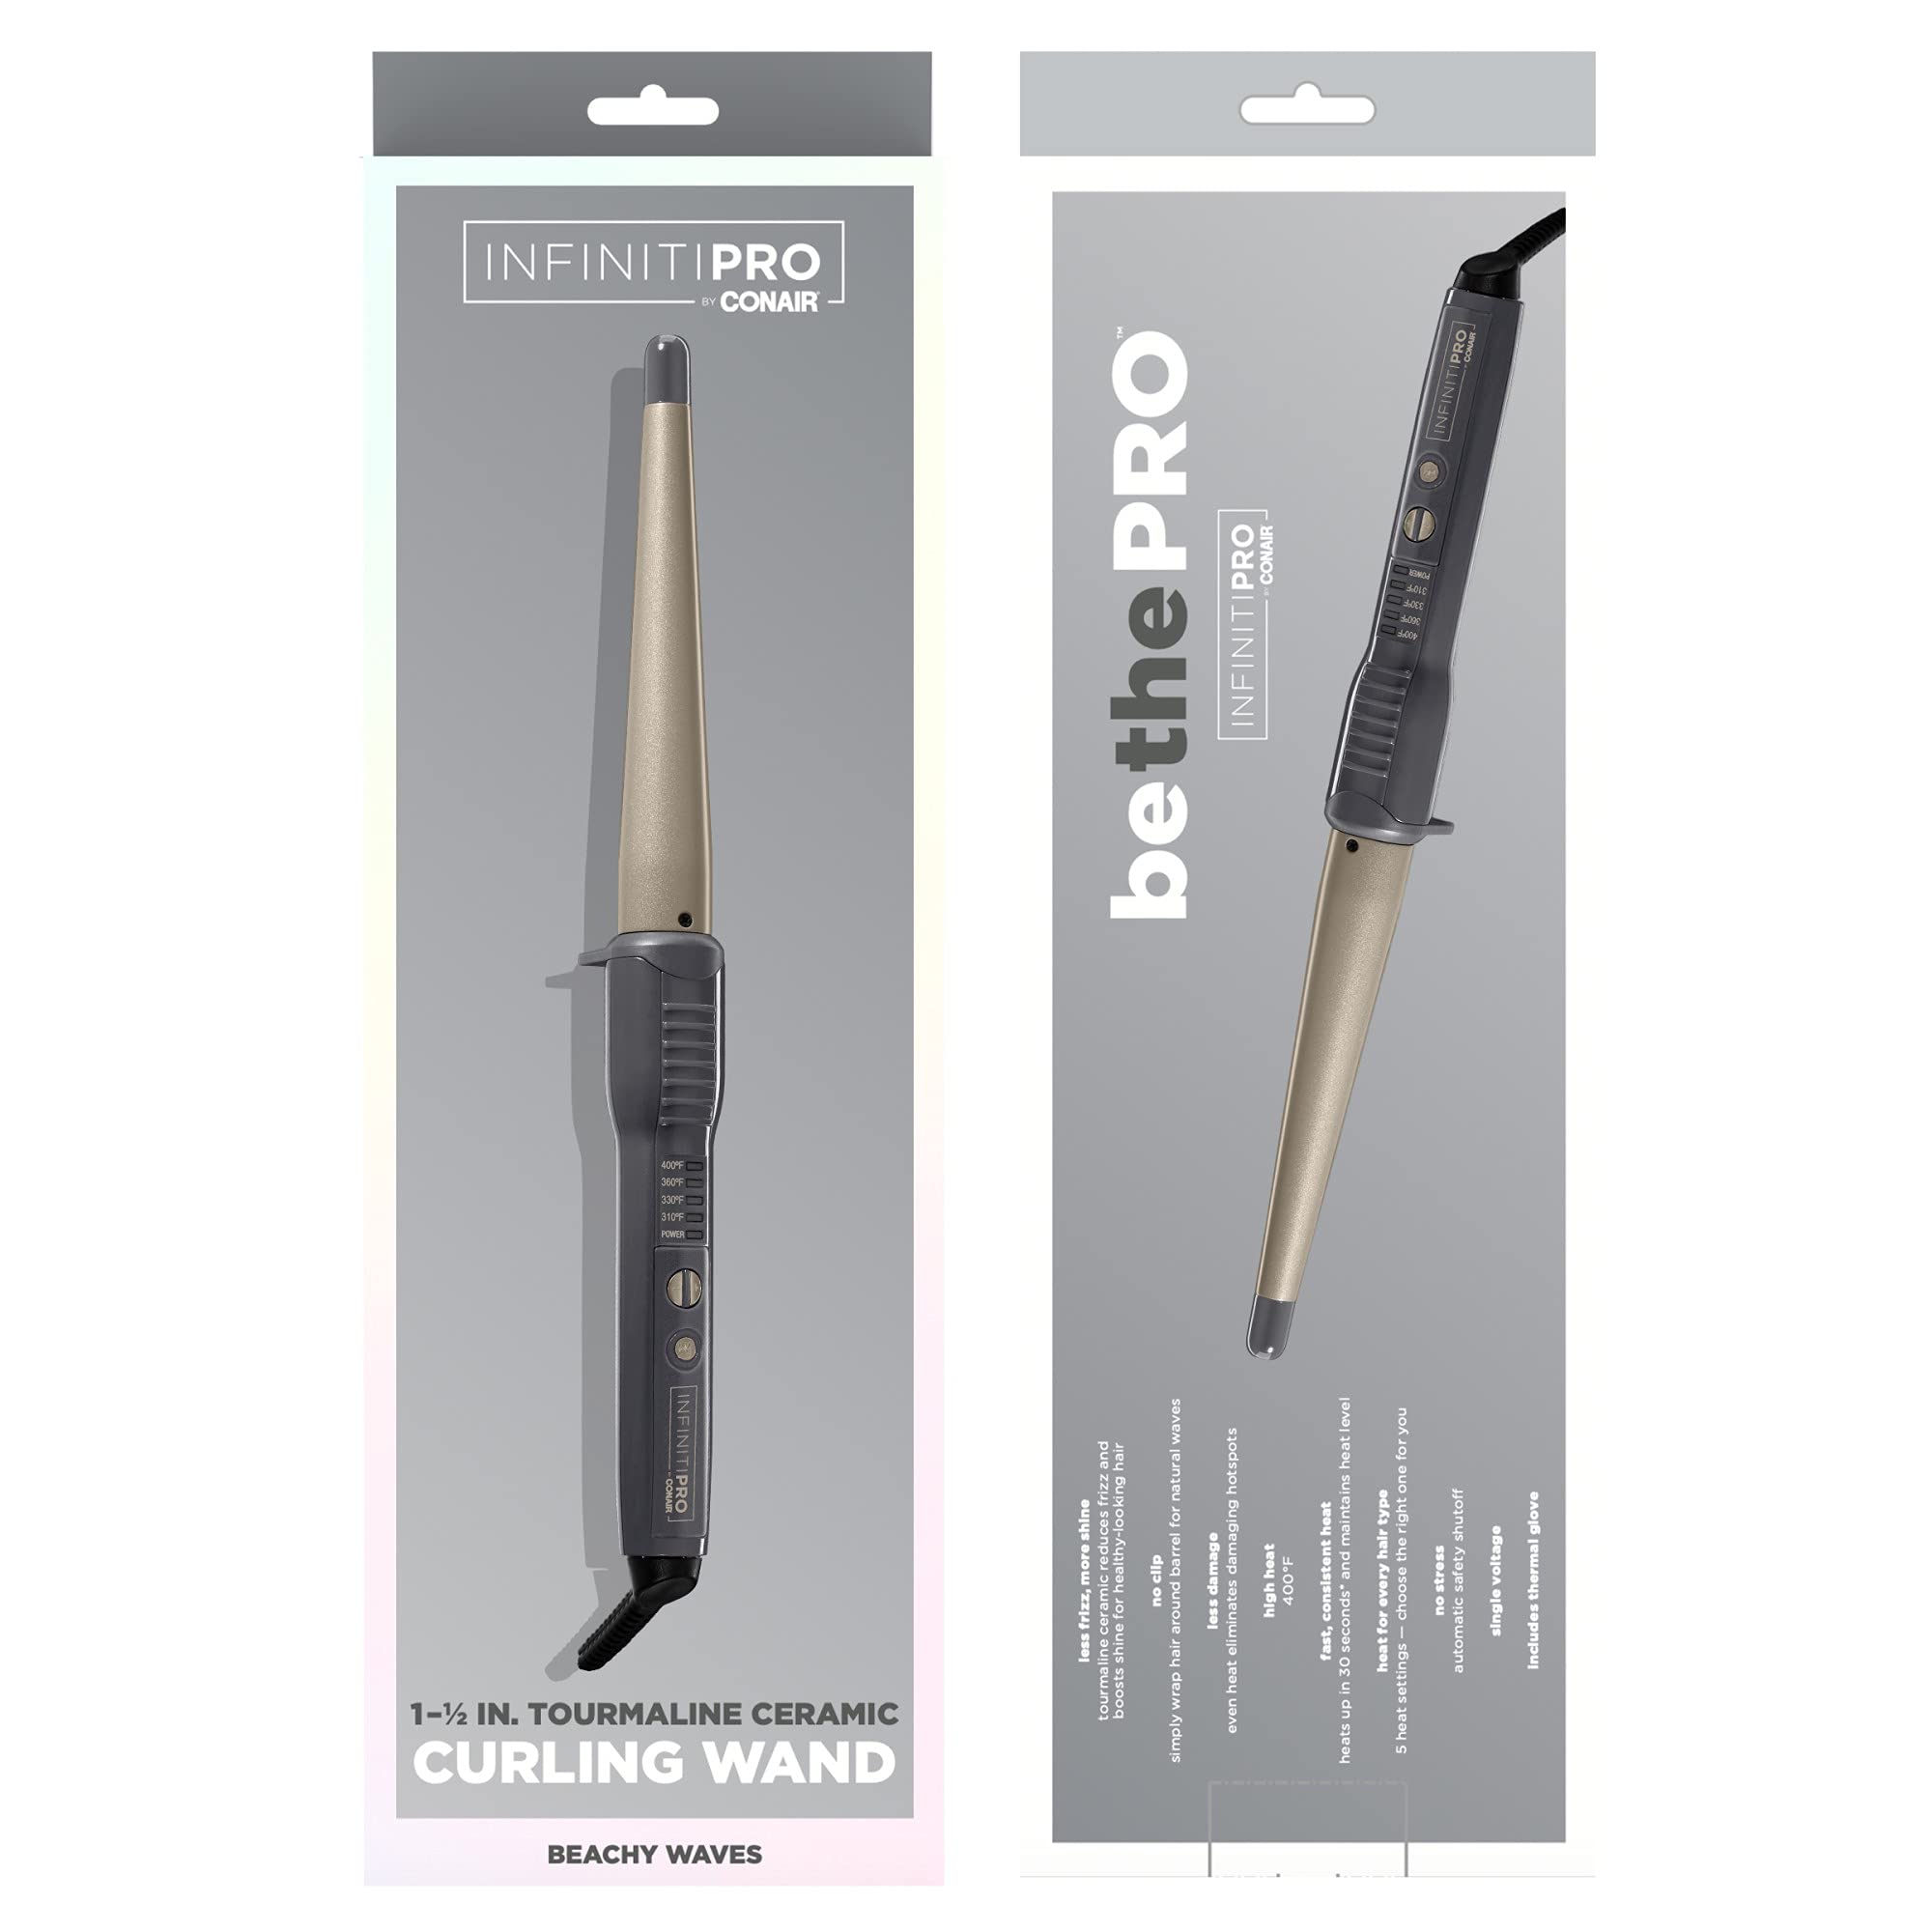 INFINITIPRO BY CONAIR Tourmaline Ceramic 1-Inch to 1/2-Inch Curling Wand, Tapered wand produces beachy waves